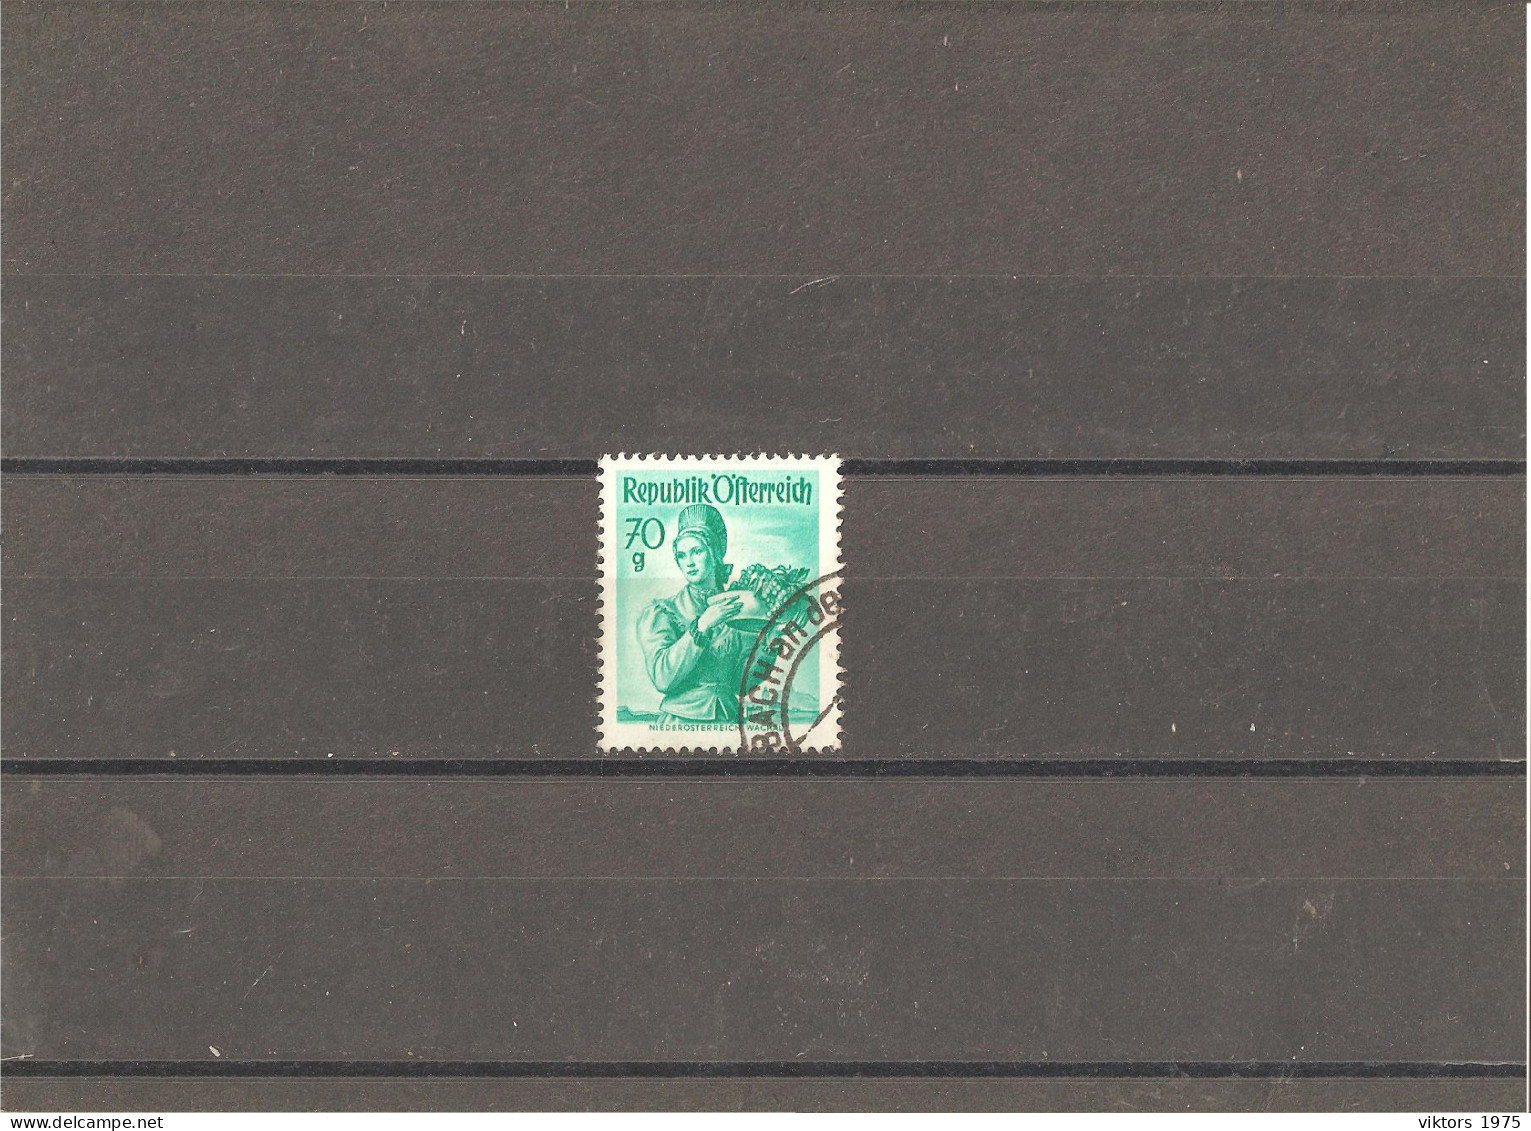 Used Stamp Nr.906 In MICHEL Catalog - Used Stamps